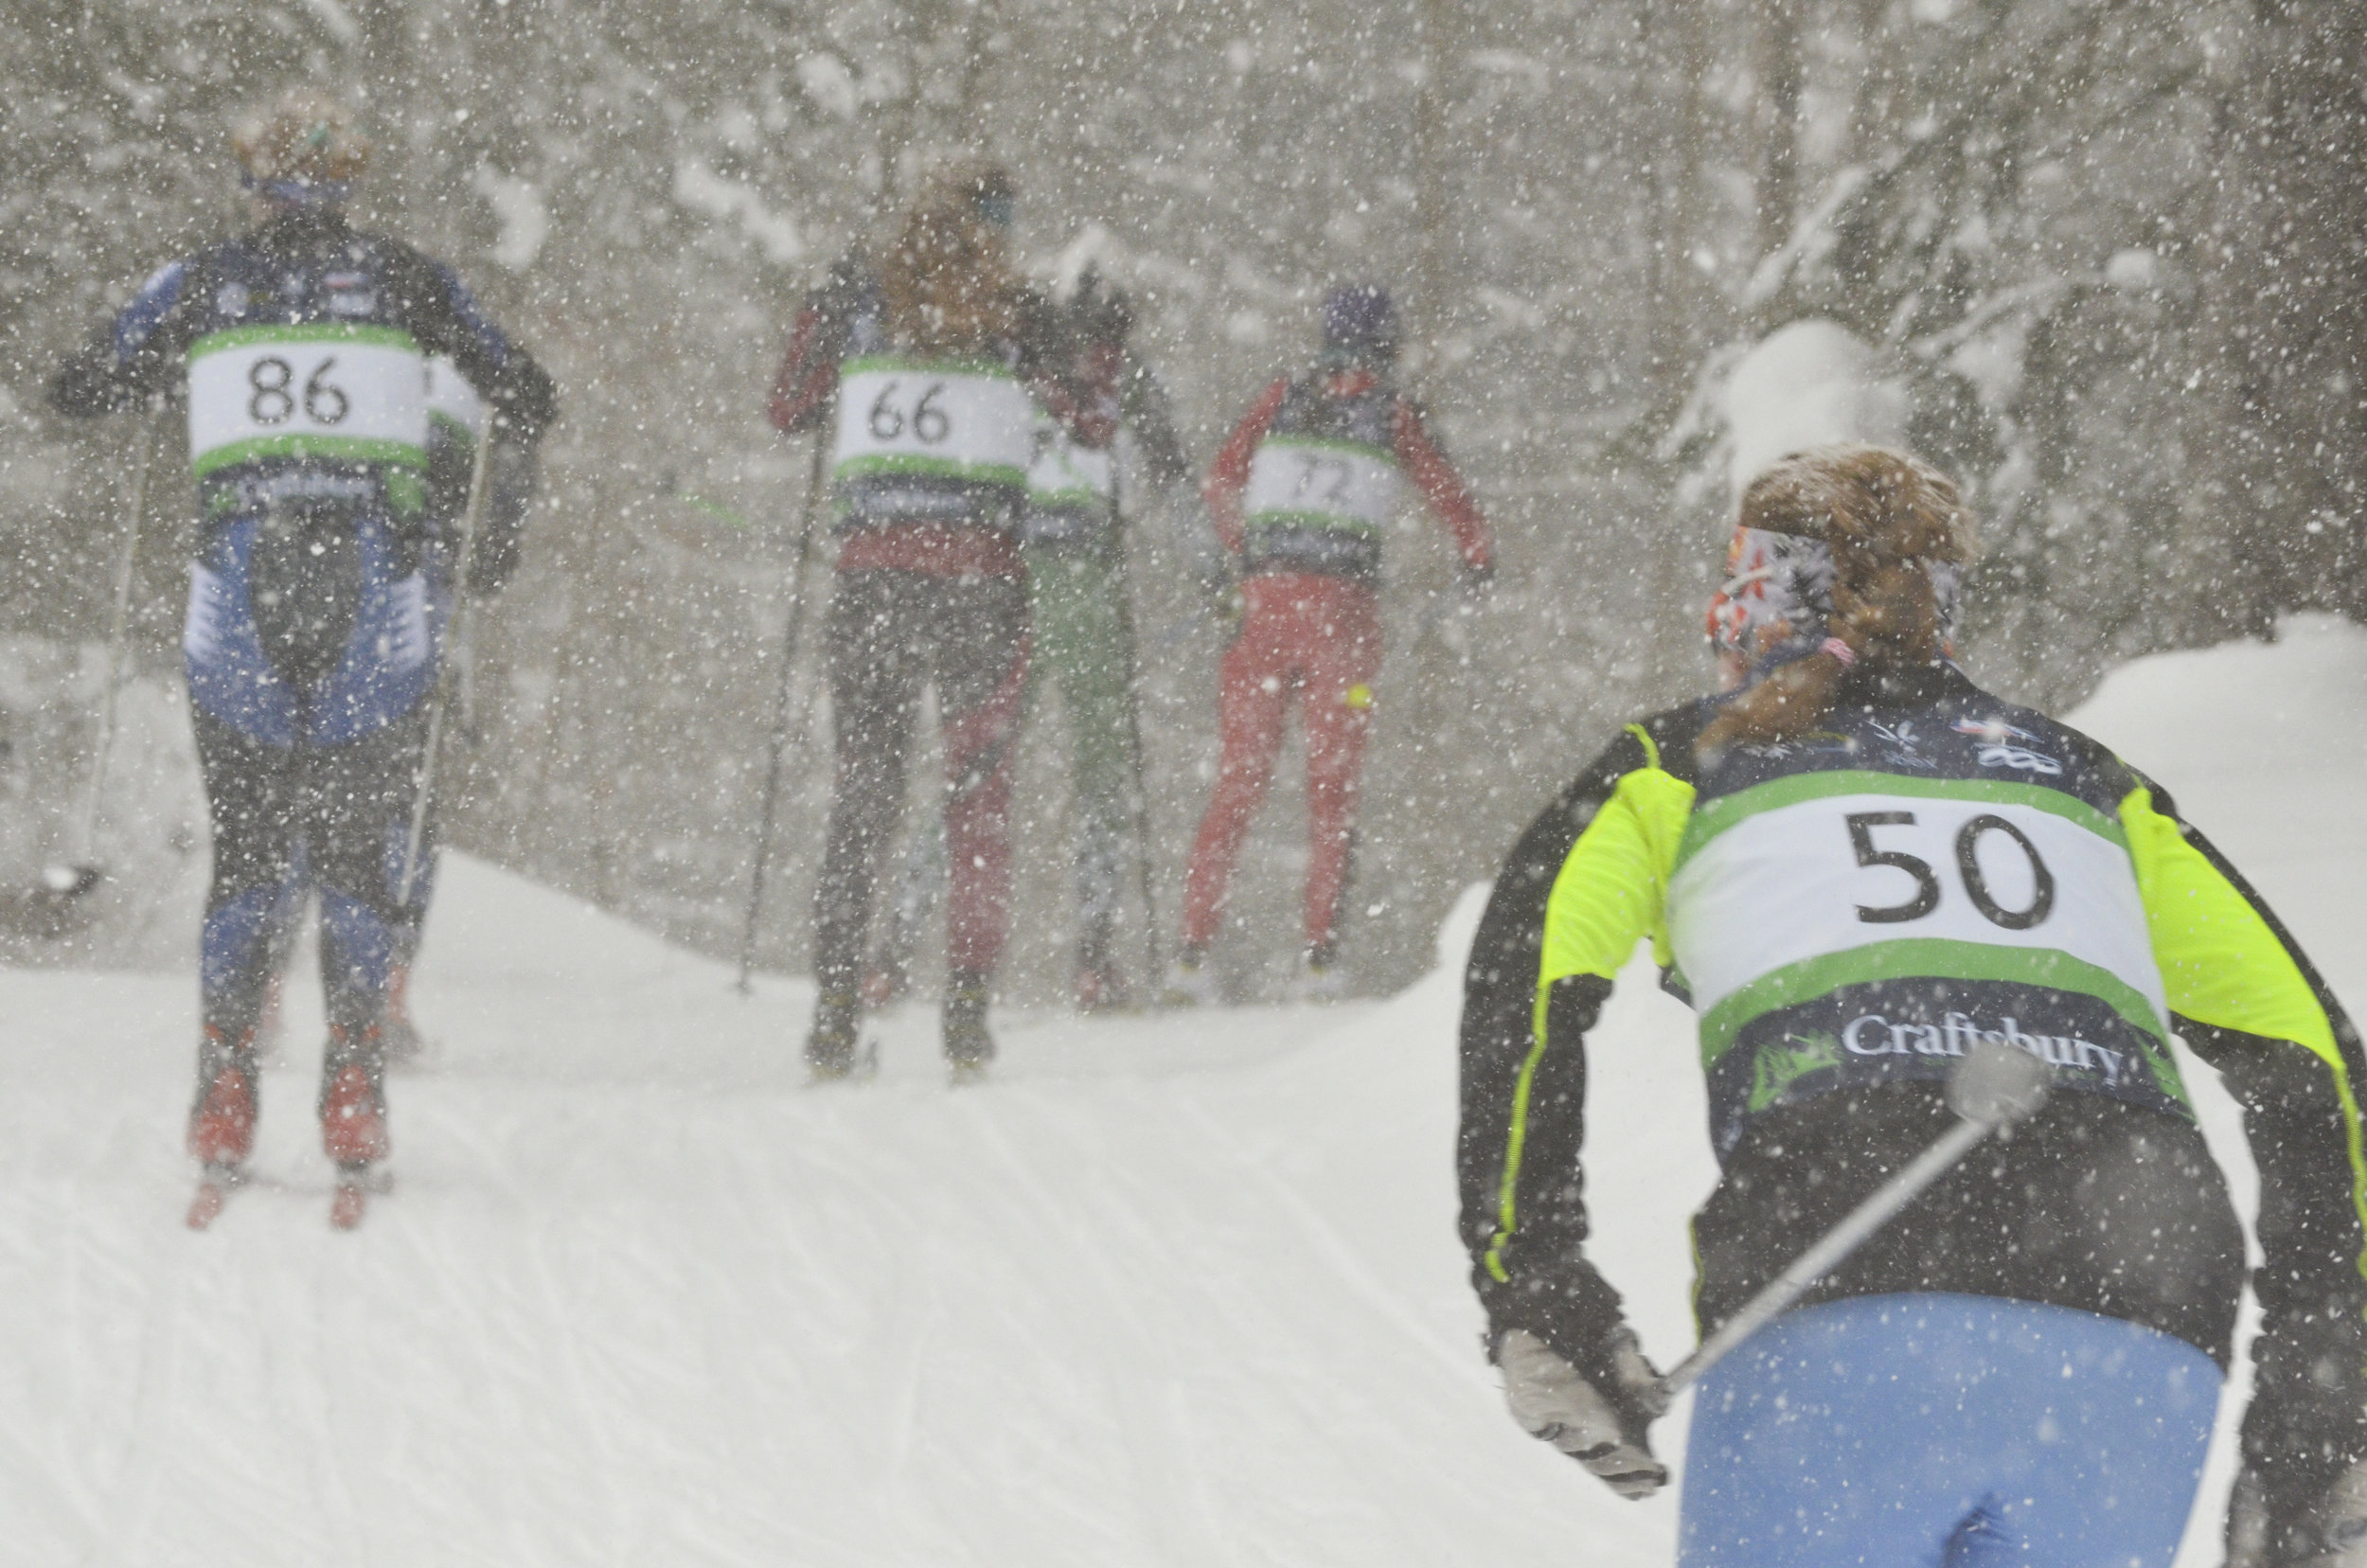 Snow got quite heavy at times for the women’s race.